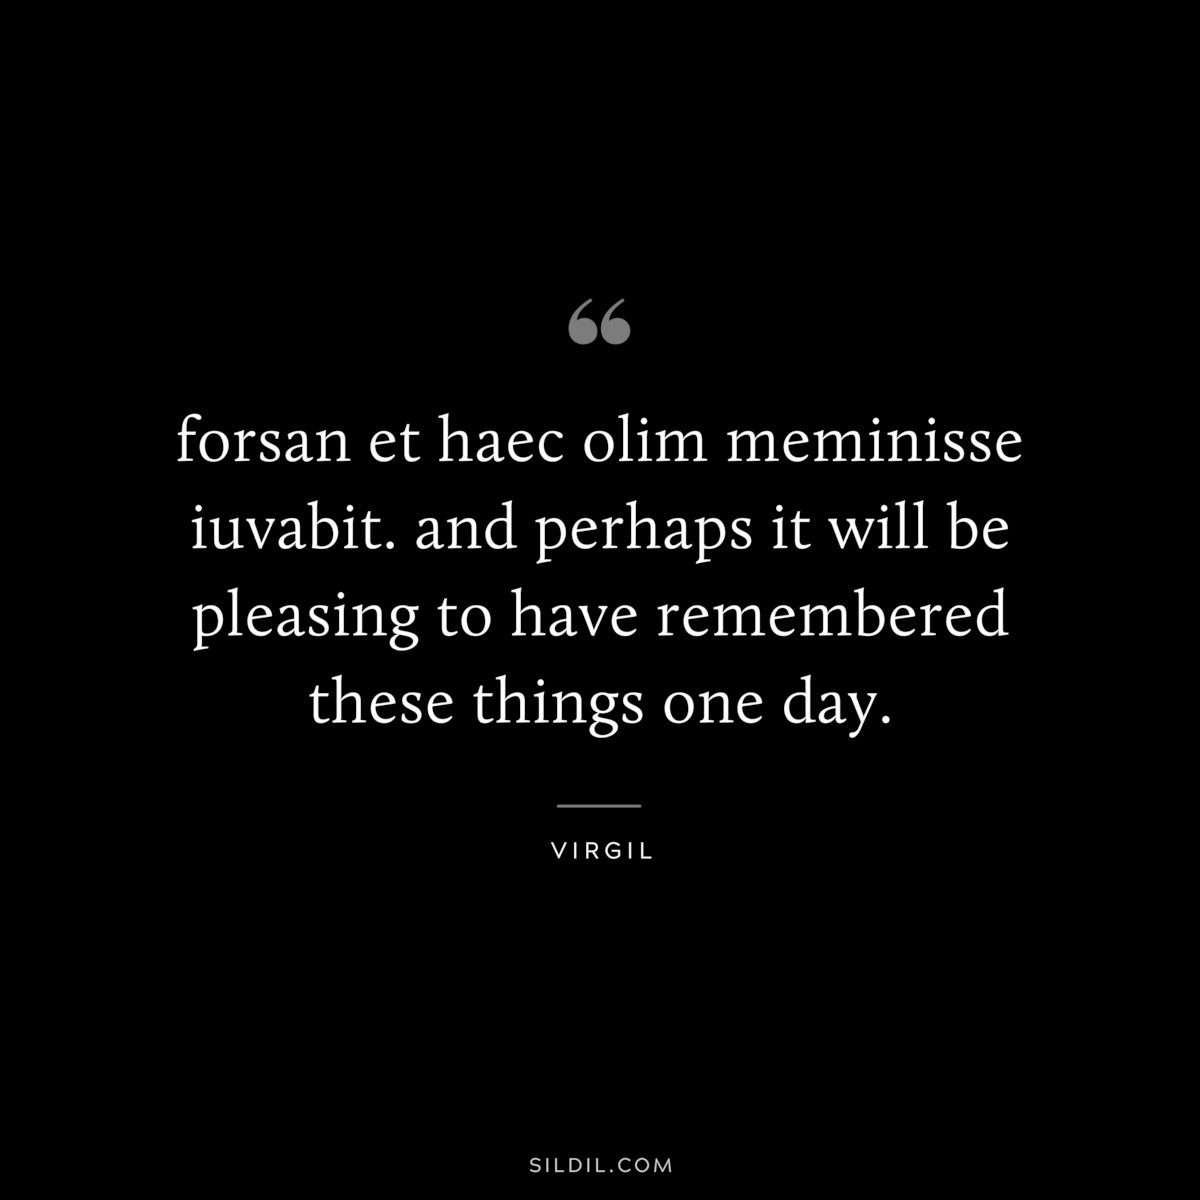 forsan et haec olim meminisse iuvabit. and perhaps it will be pleasing to have remembered these things one day. ― Virgil